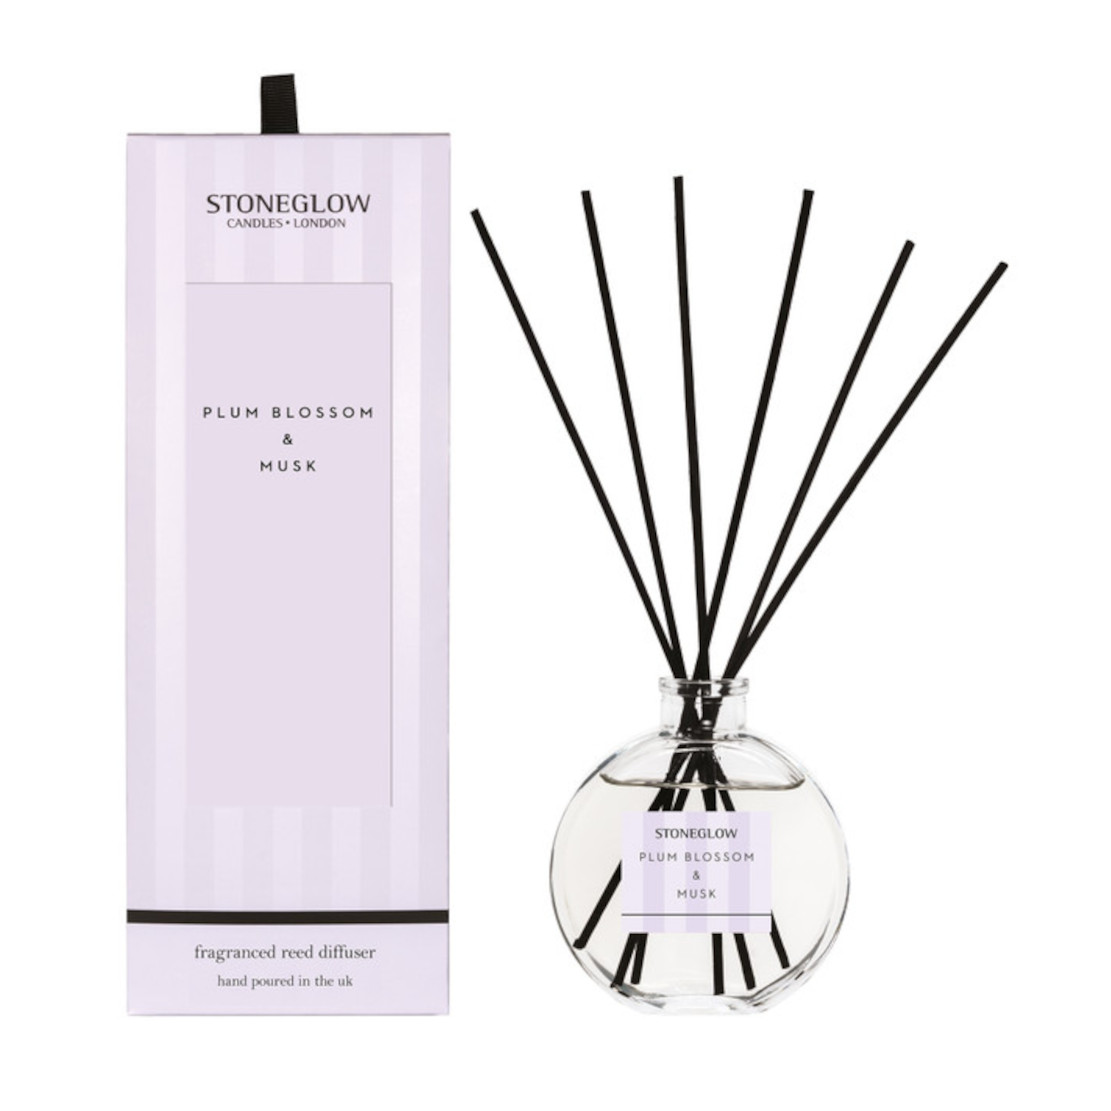 Stoneglow Plum Blossom & Musk Reed Diffuser 120ml